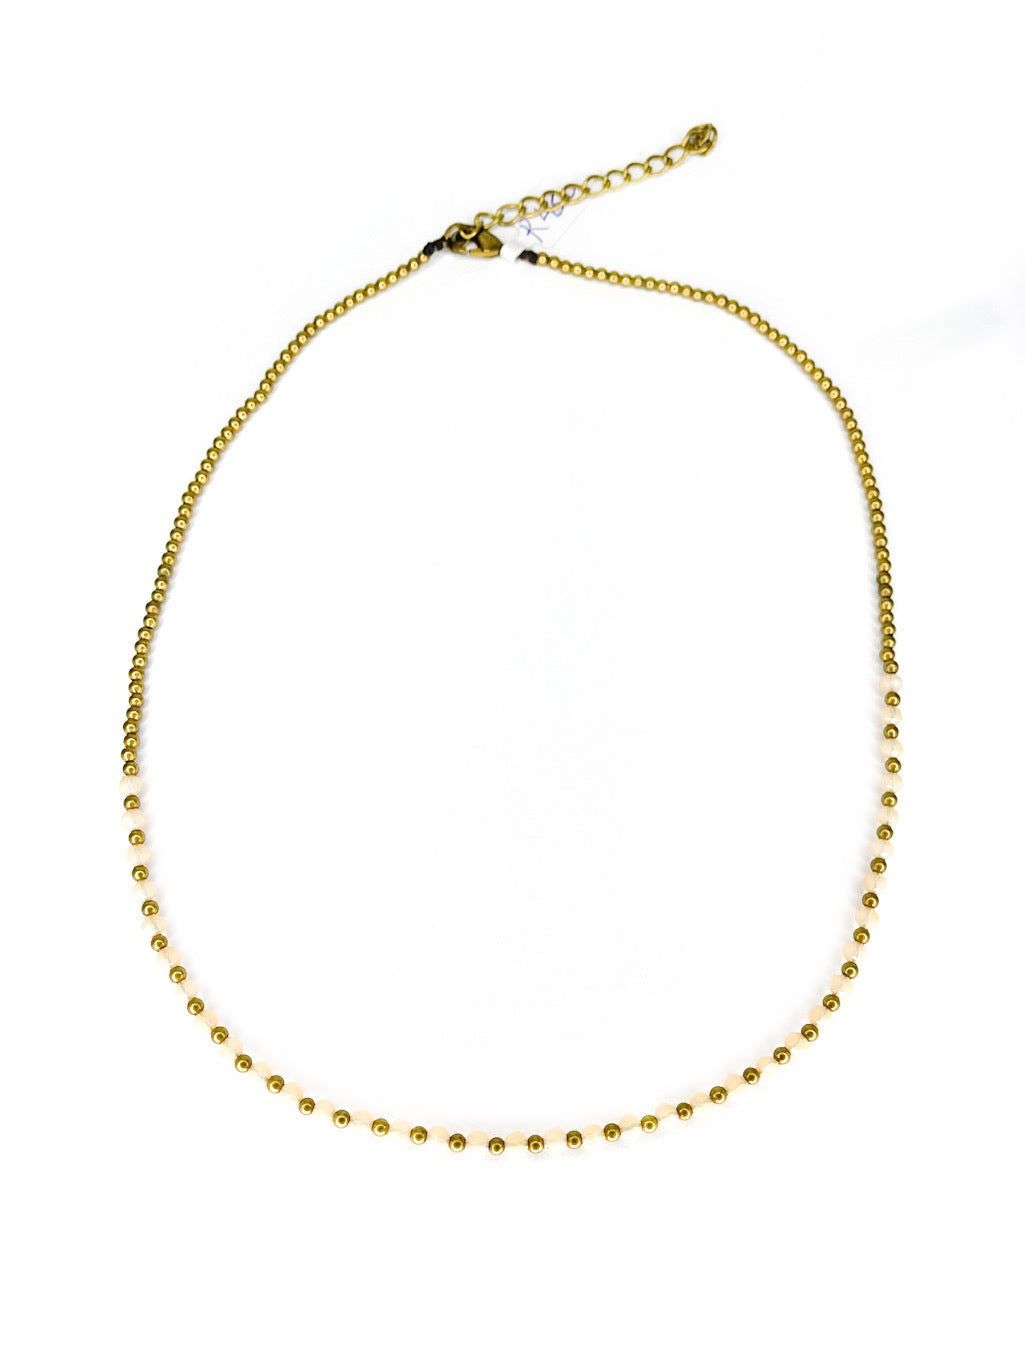 Faceted stone and brass necklace - various colours